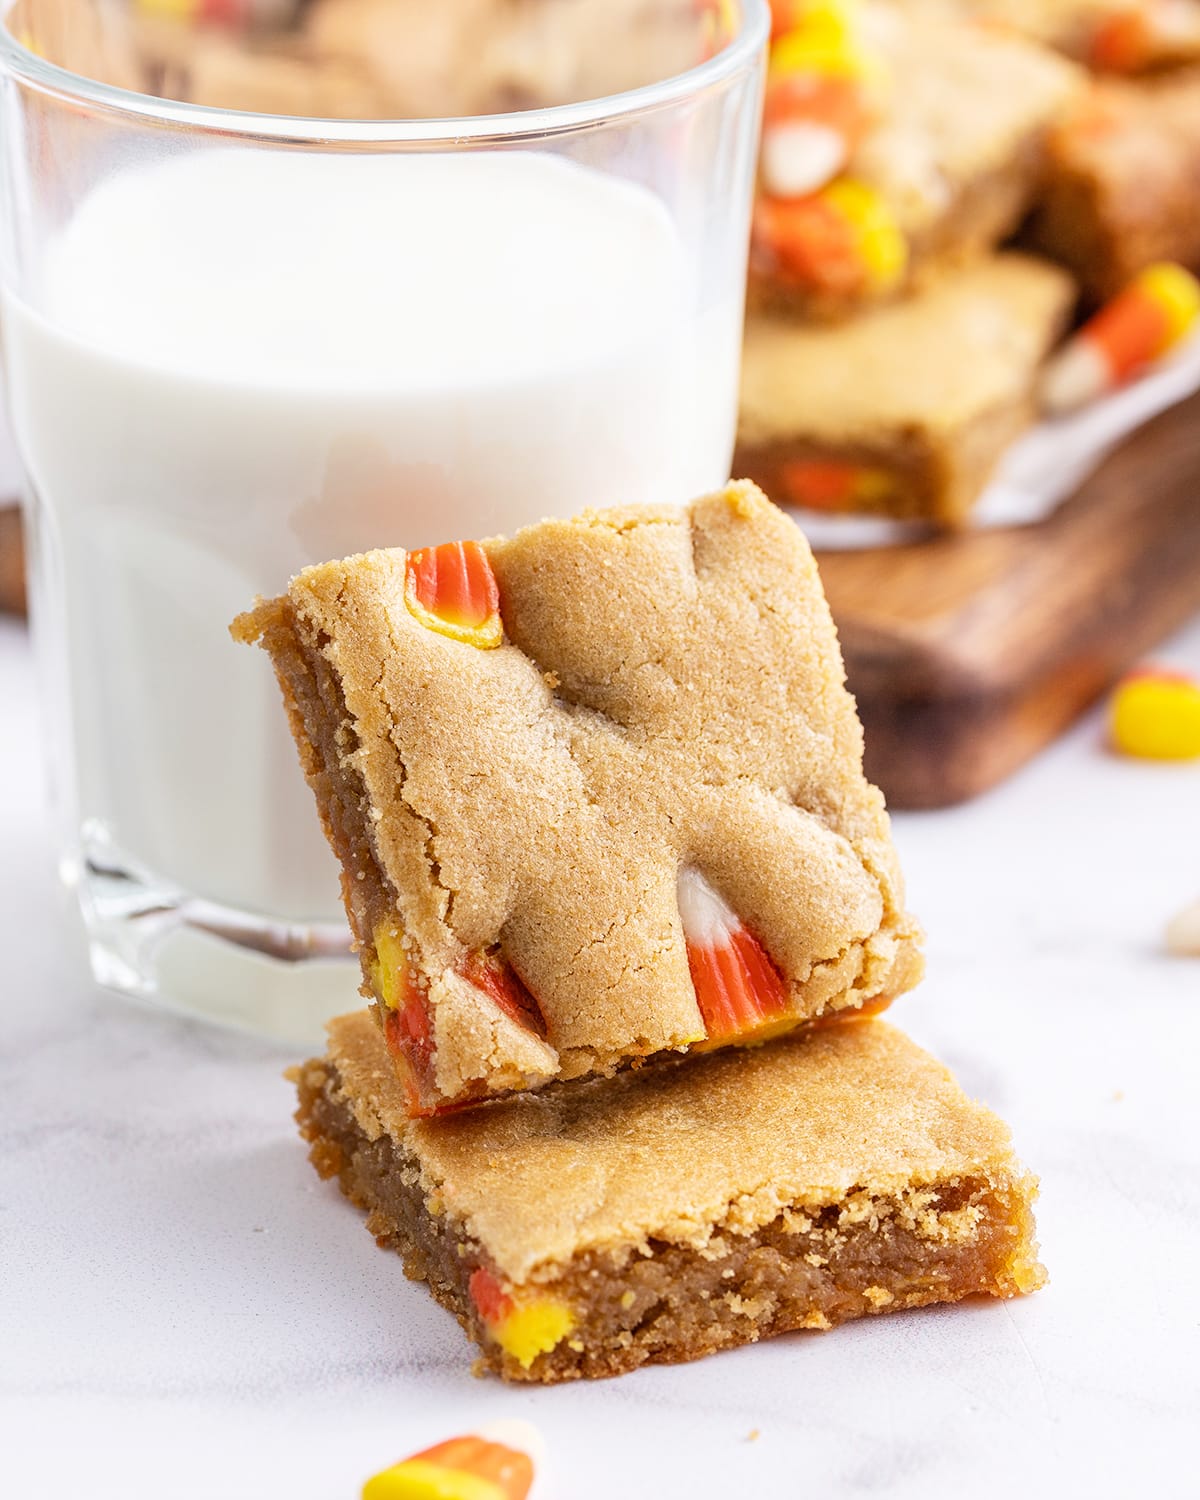 Two pieces of peanut butter bars with candy corn in them leaning on a glass of milk.